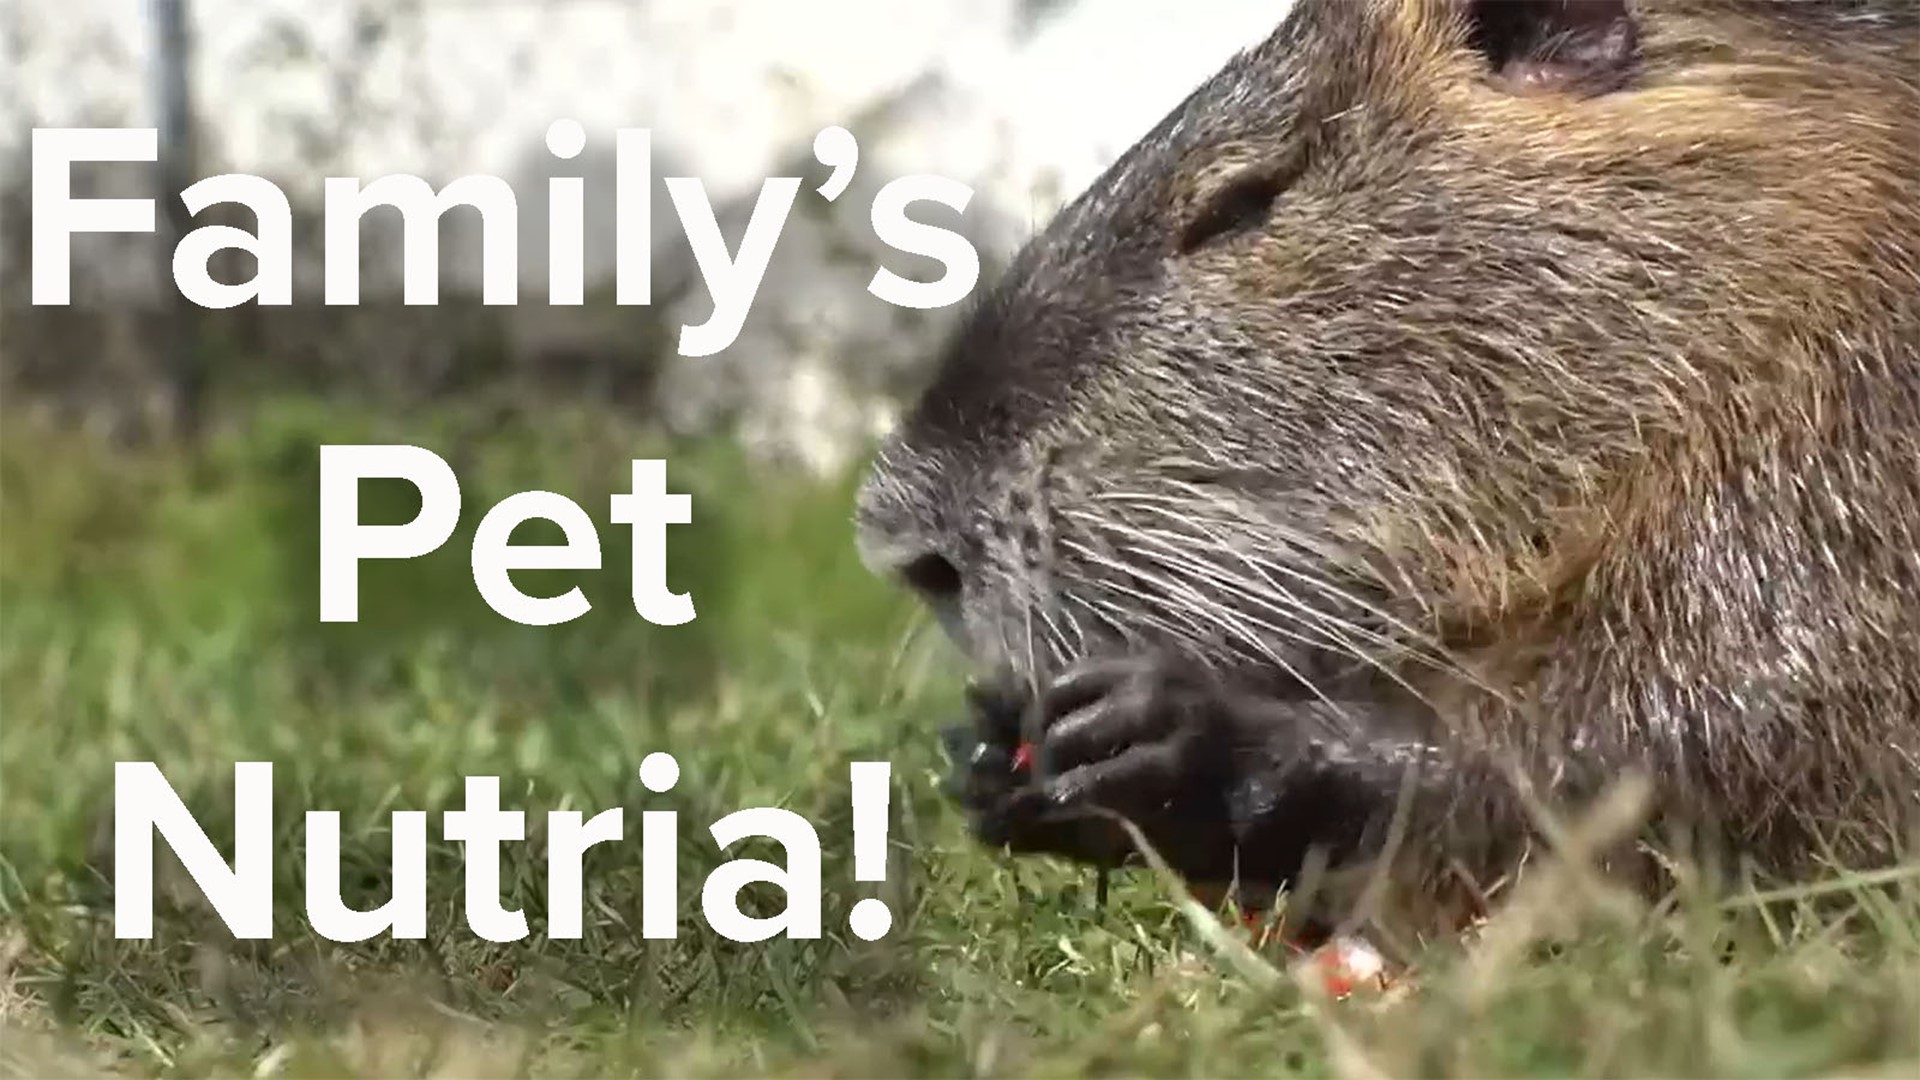 The 2-year-old nutria, Neuty, goes to work with the Lacoste family at Dennis' Seafood in Metairie.